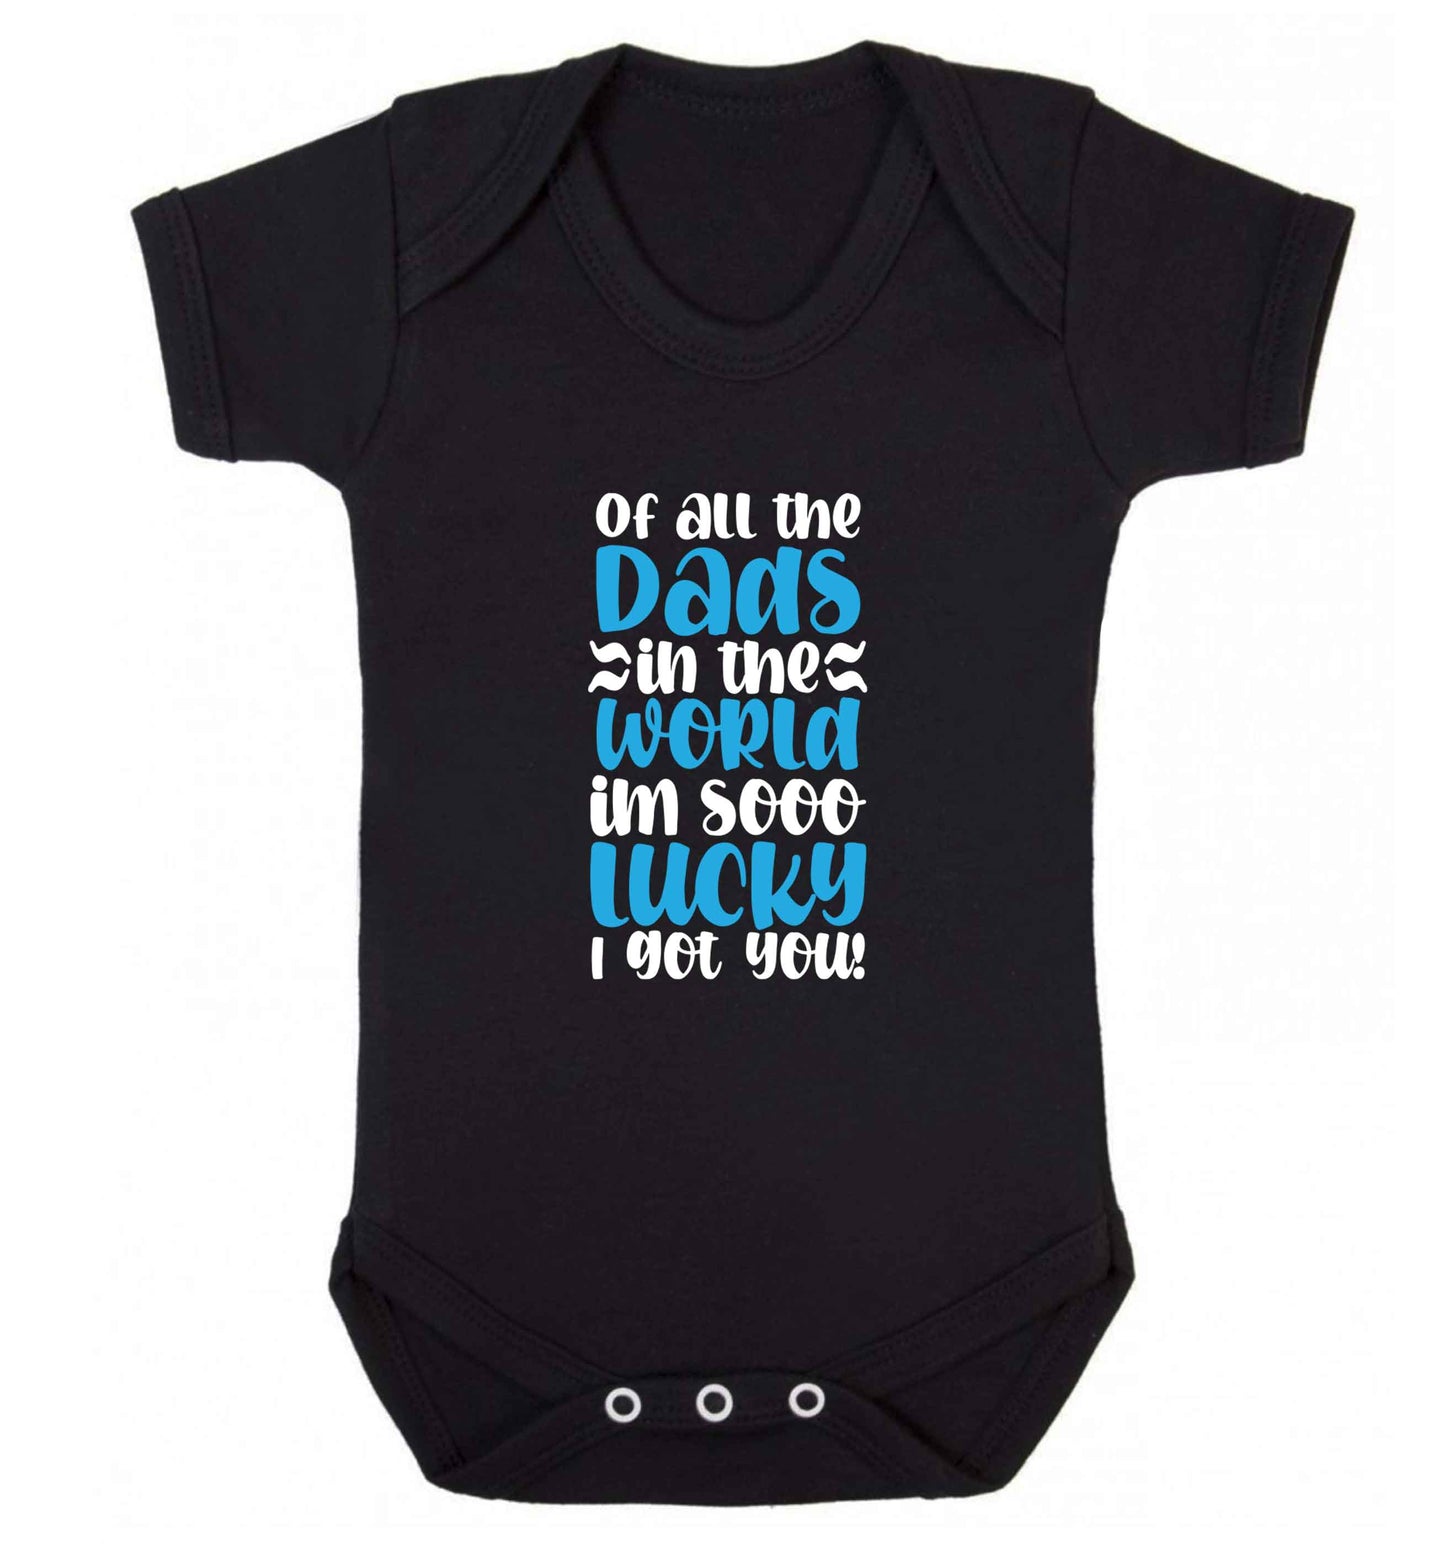 I'm as lucky as can be the worlds greatest dad belongs to me! baby vest black 18-24 months